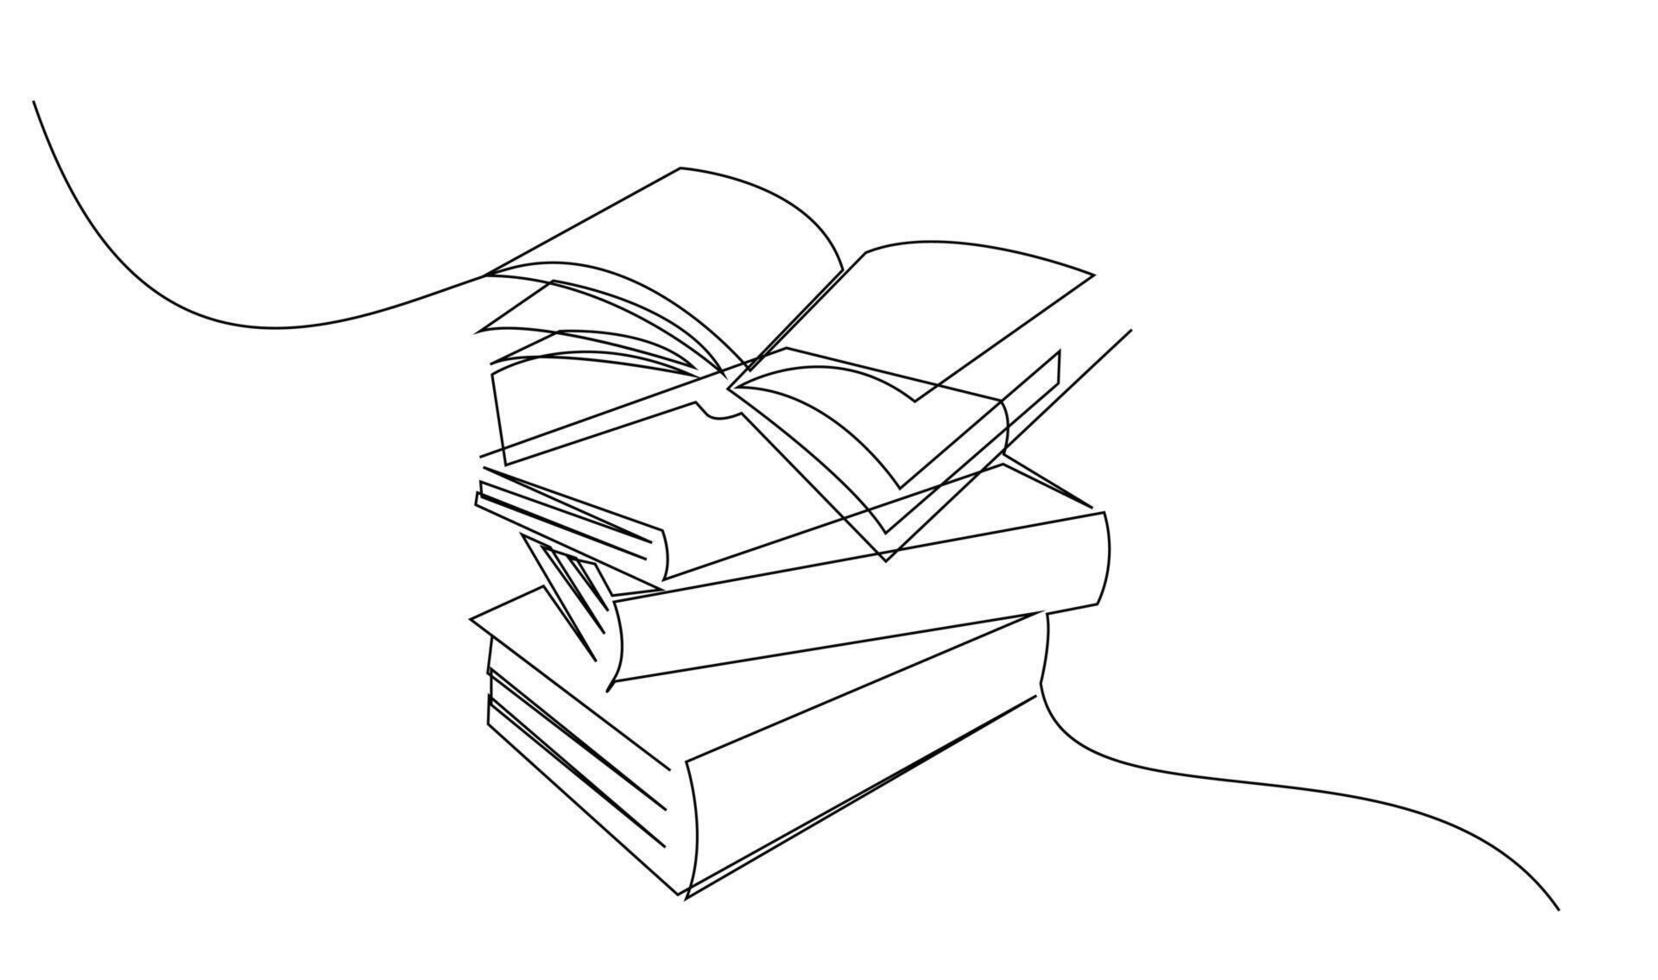 Continuous line art drawing of book illustration vector